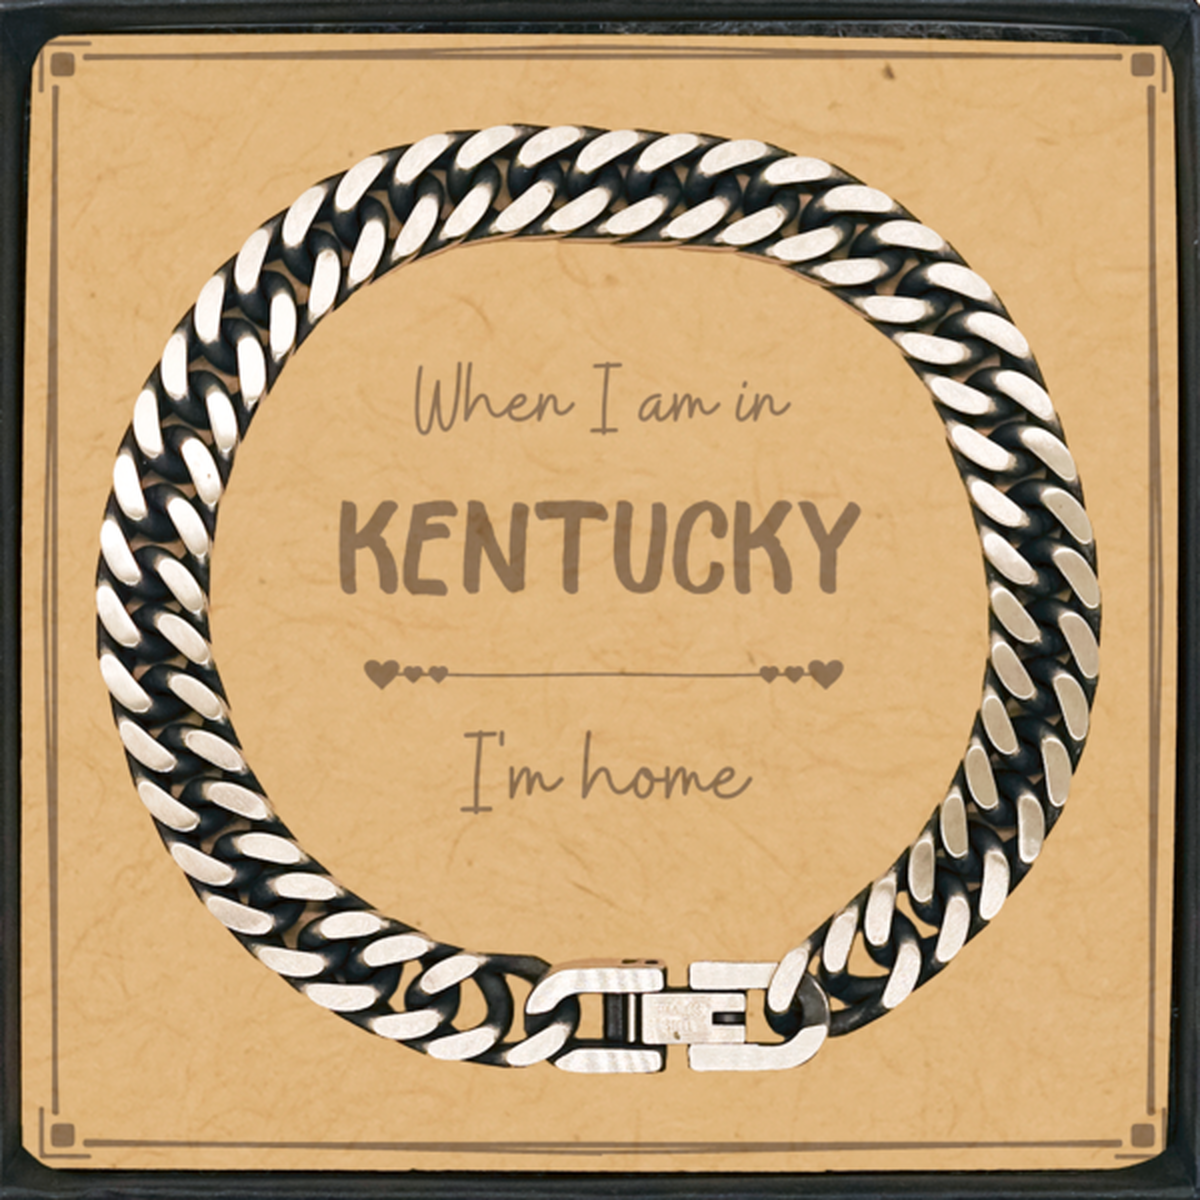 When I am in Kentucky I'm home Cuban Link Chain Bracelet, Message Card Gifts For Kentucky, State Kentucky Birthday Gifts for Friends Coworker